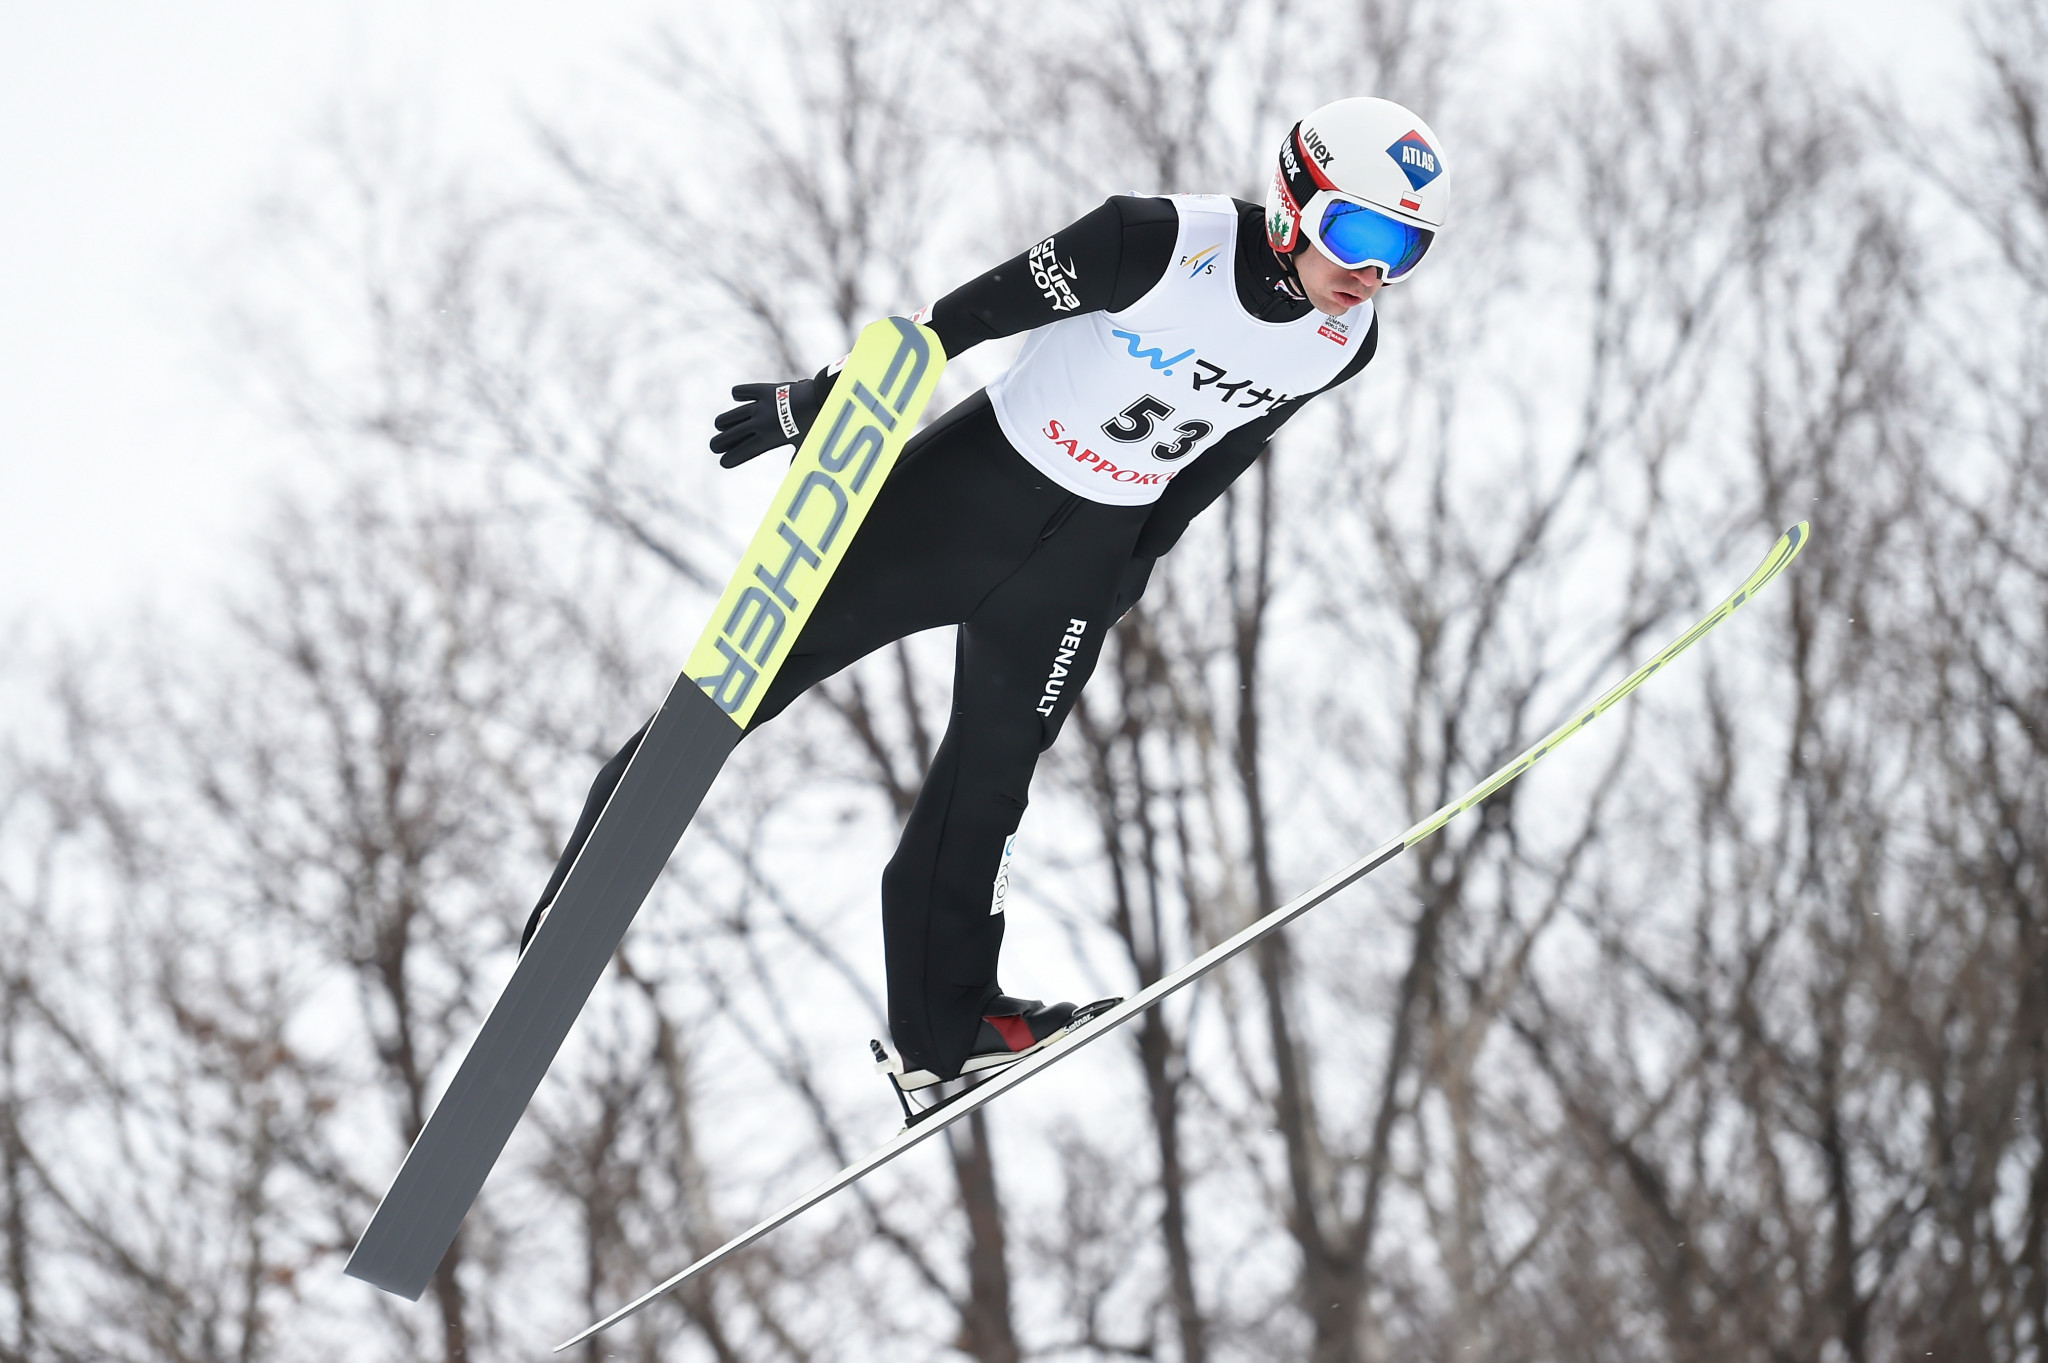 Stoch tops qualifying at season-opening FIS Ski Jumping World Cup leg in Wisla